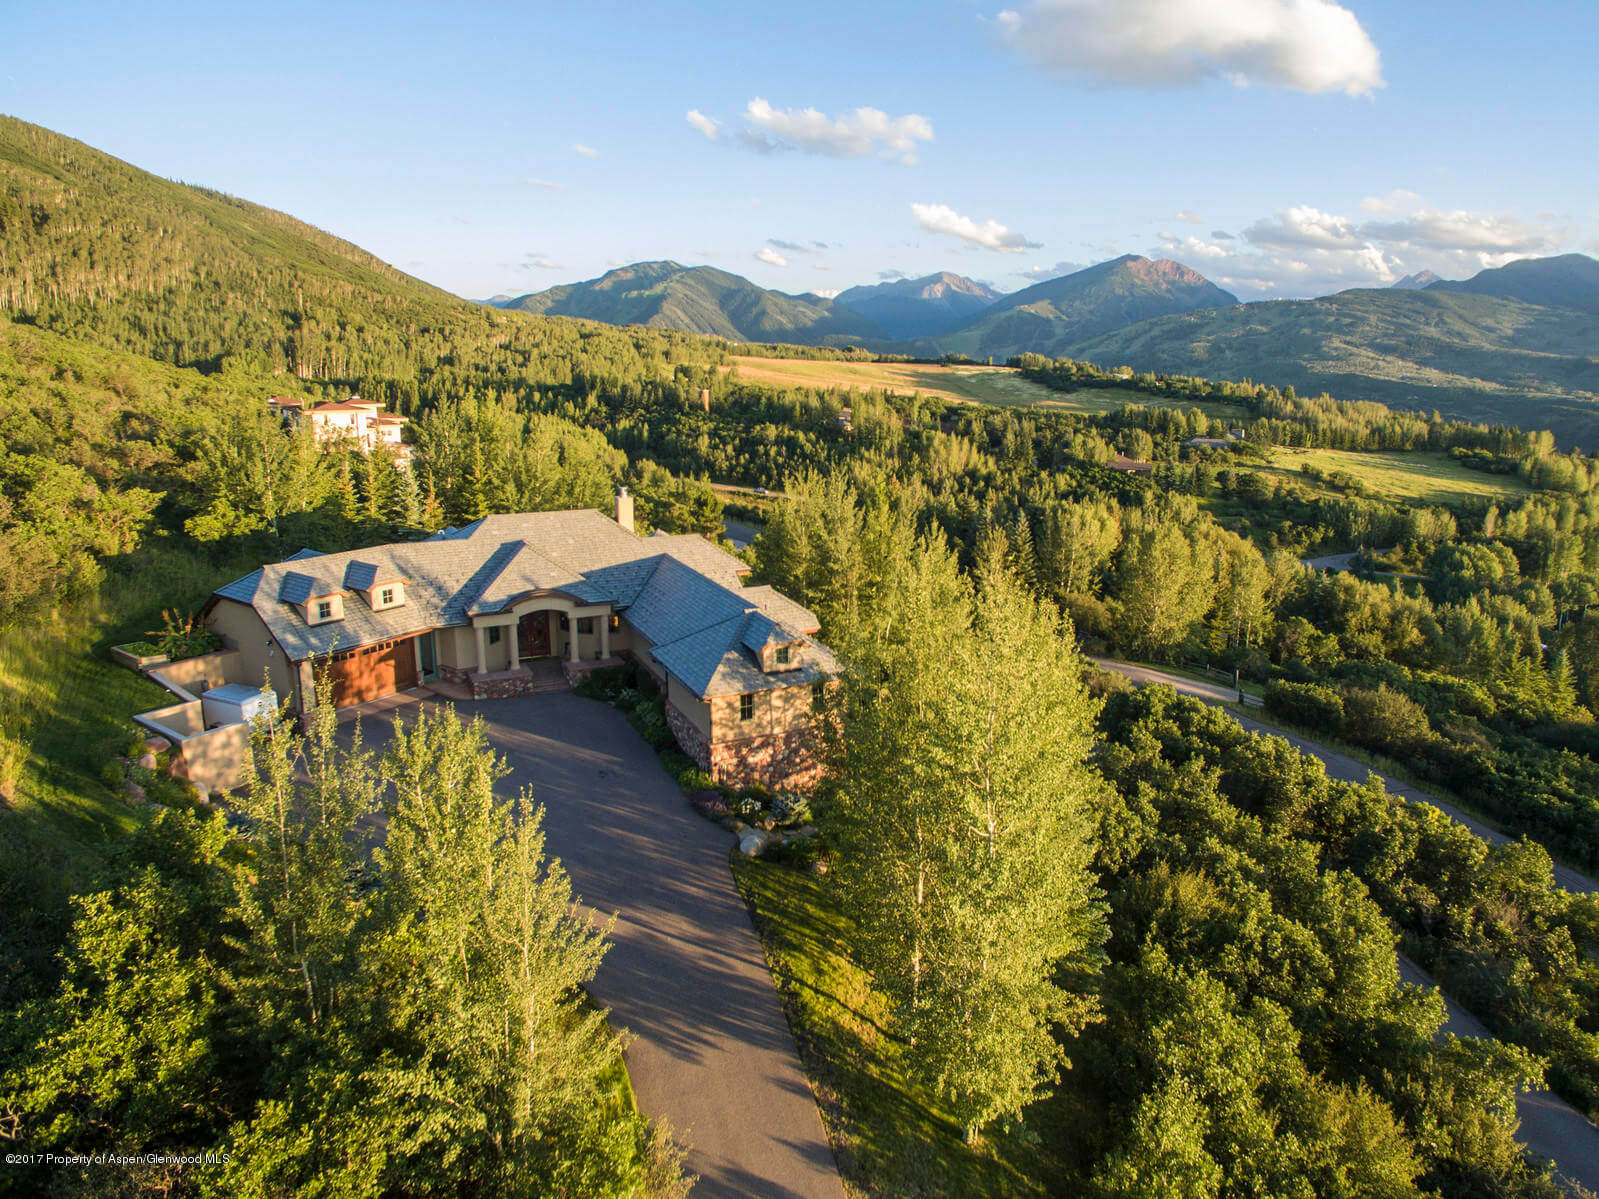 2006 Built Starwood Home in Aspen’s Only Gated Community Closes at $4.4M/$765 Sq Ft Image